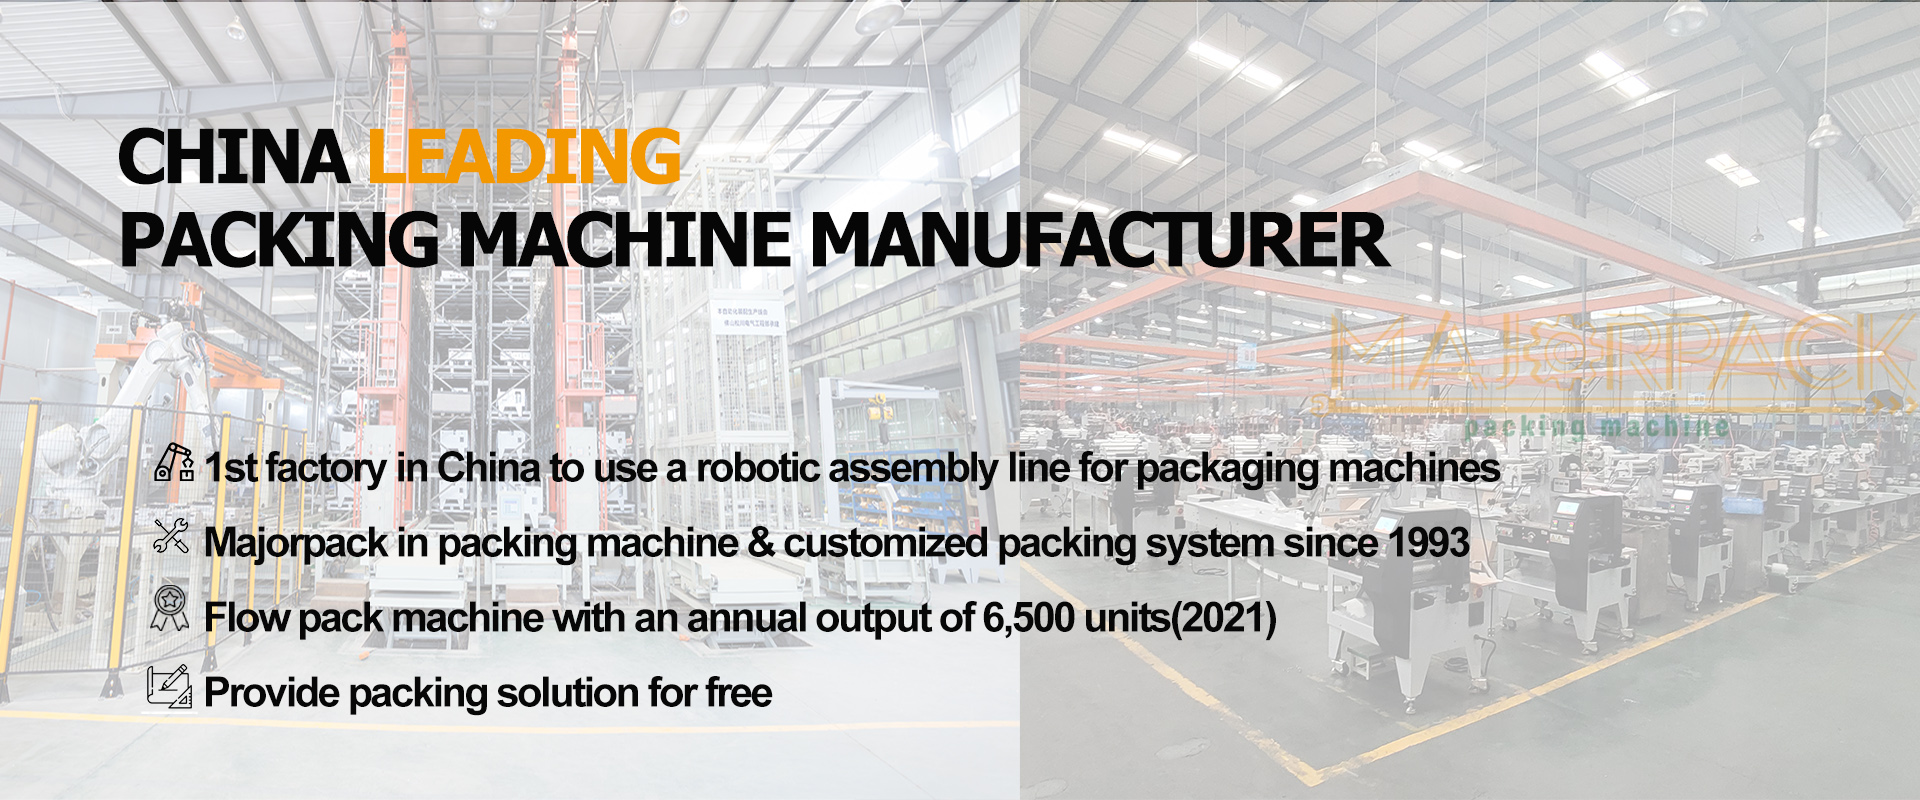 Majorpack-packing machine manufacturer since 1993